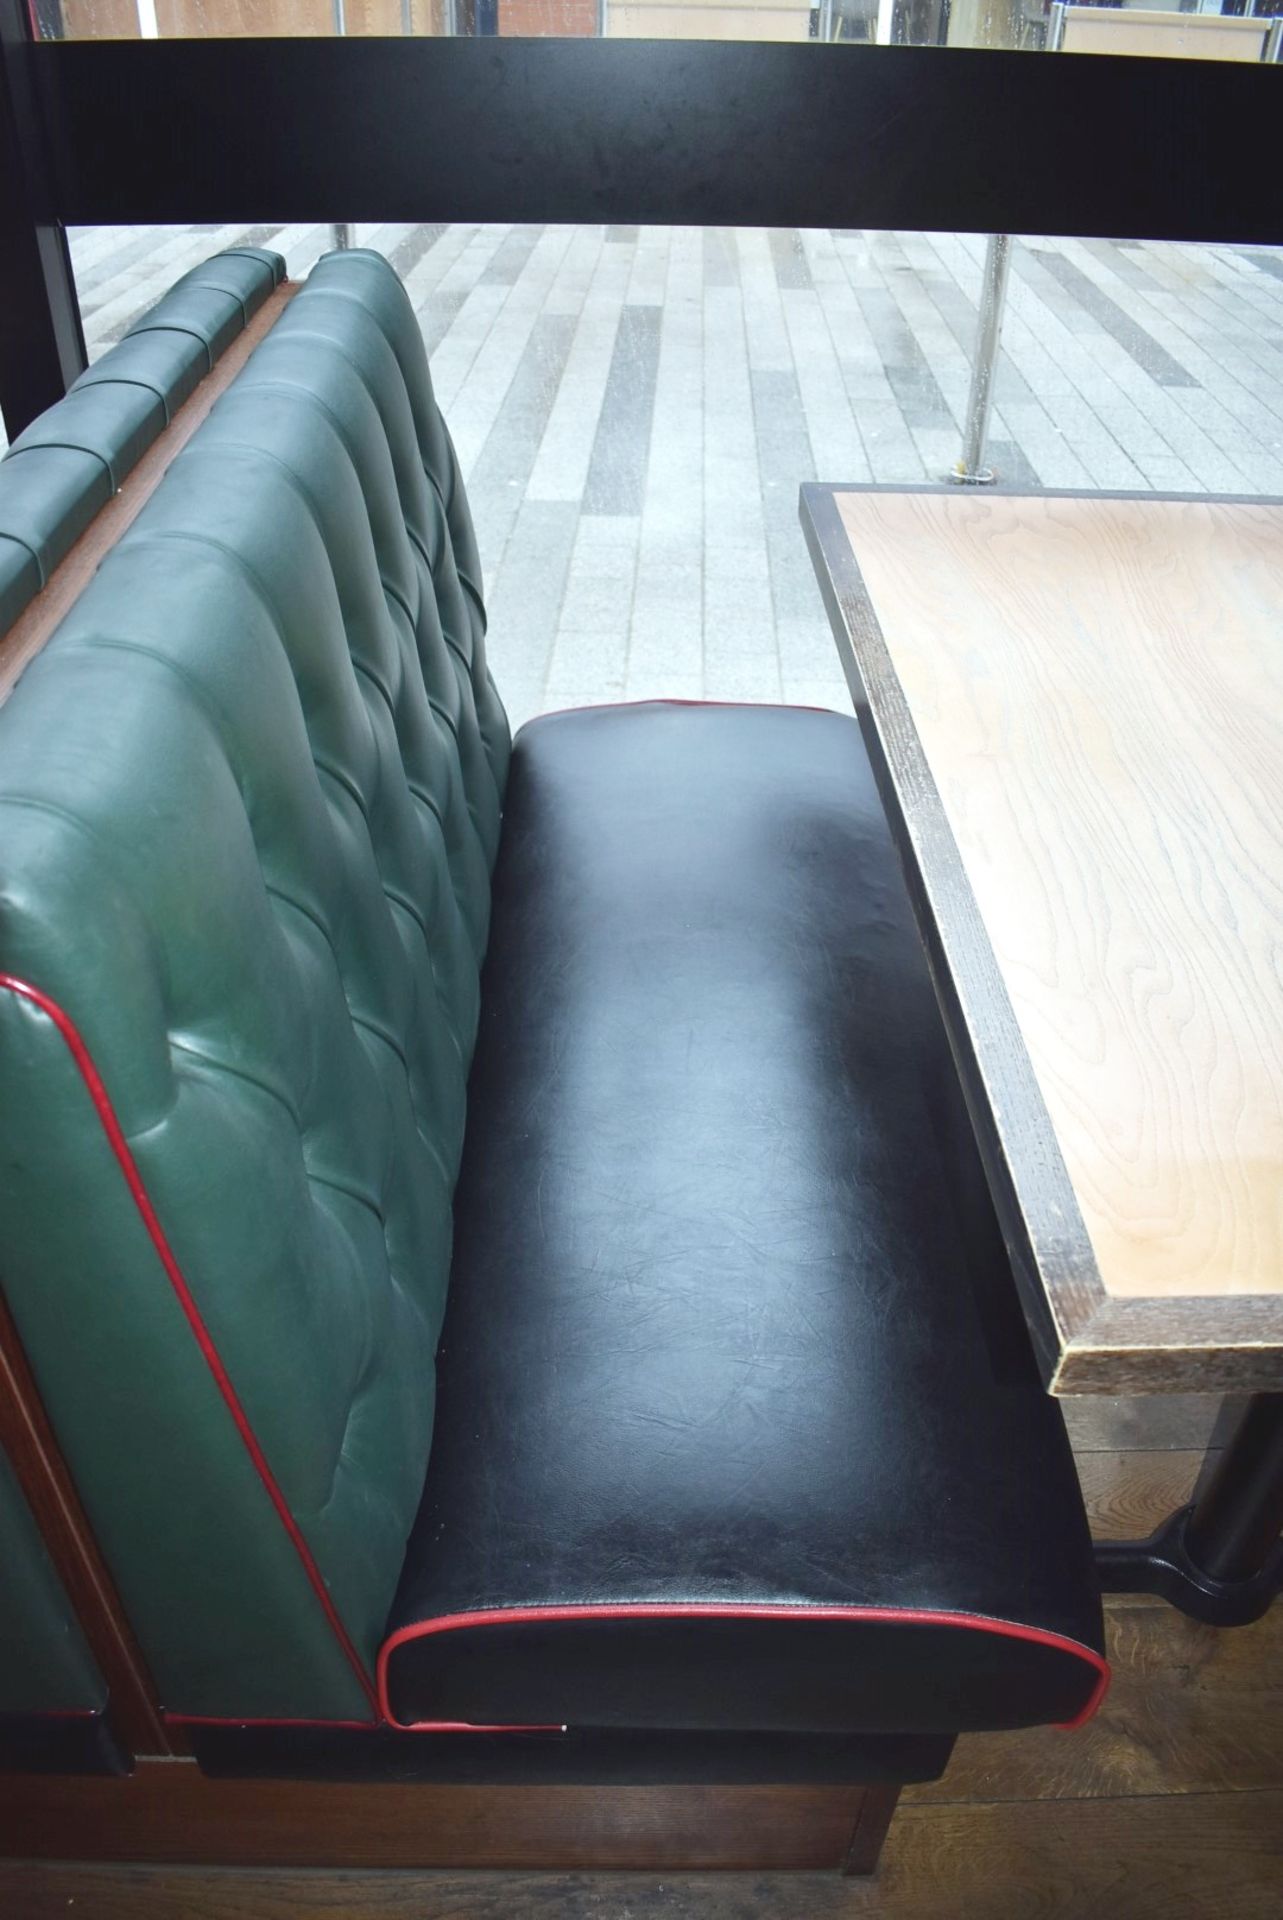 4 x Sections of Restaurant Double Booth Seating - Sits Up to 12 Persons - Green & Black Upholstery - Image 15 of 24